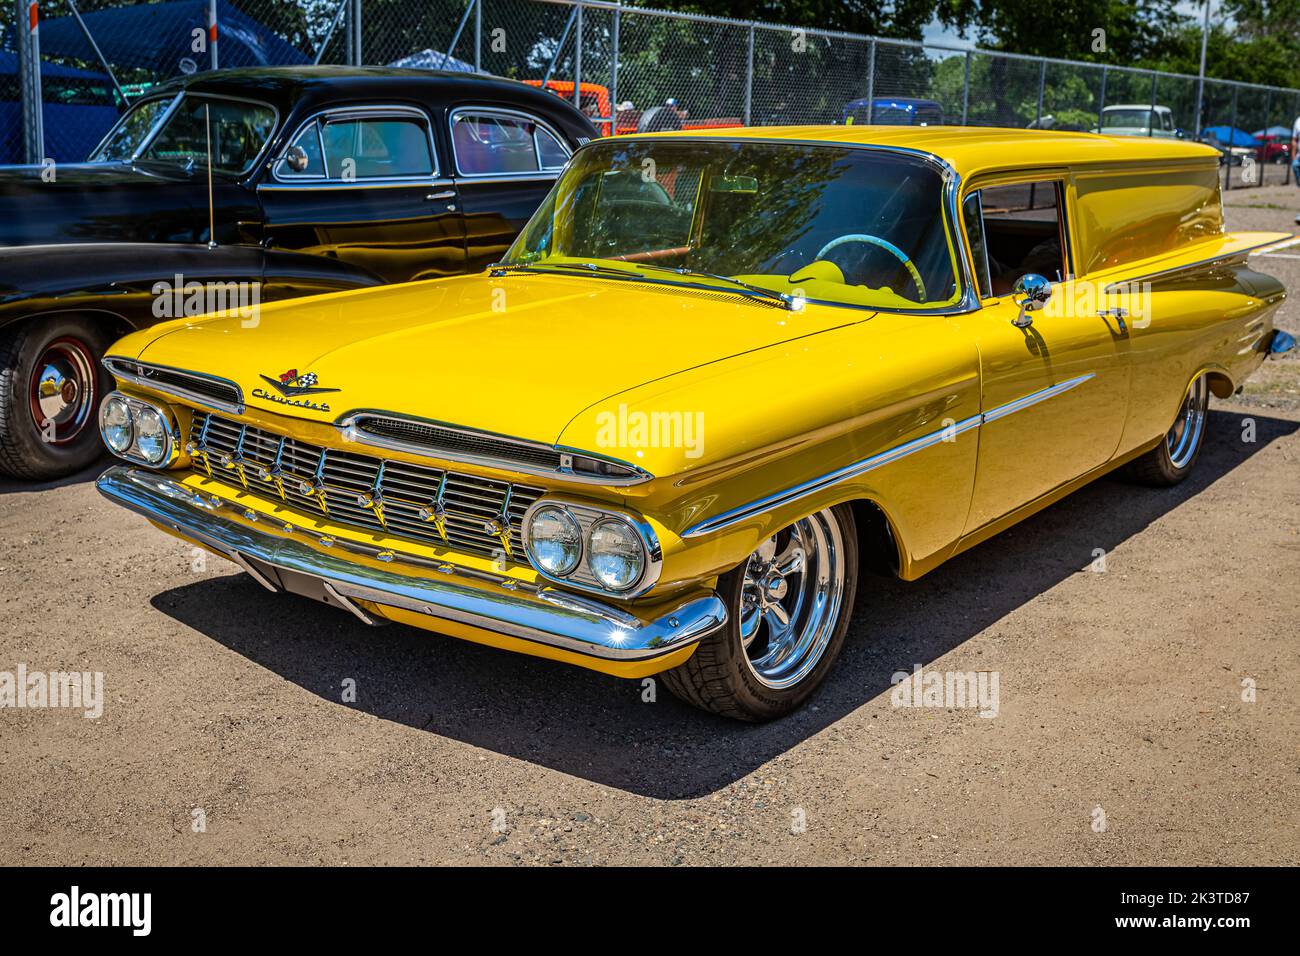 Falcon Heights, MN - June 18, 2022: High perspective front corner view of a 1959 Chevrolet Biscayne Sedan Delivery at a local car show. Stock Photo